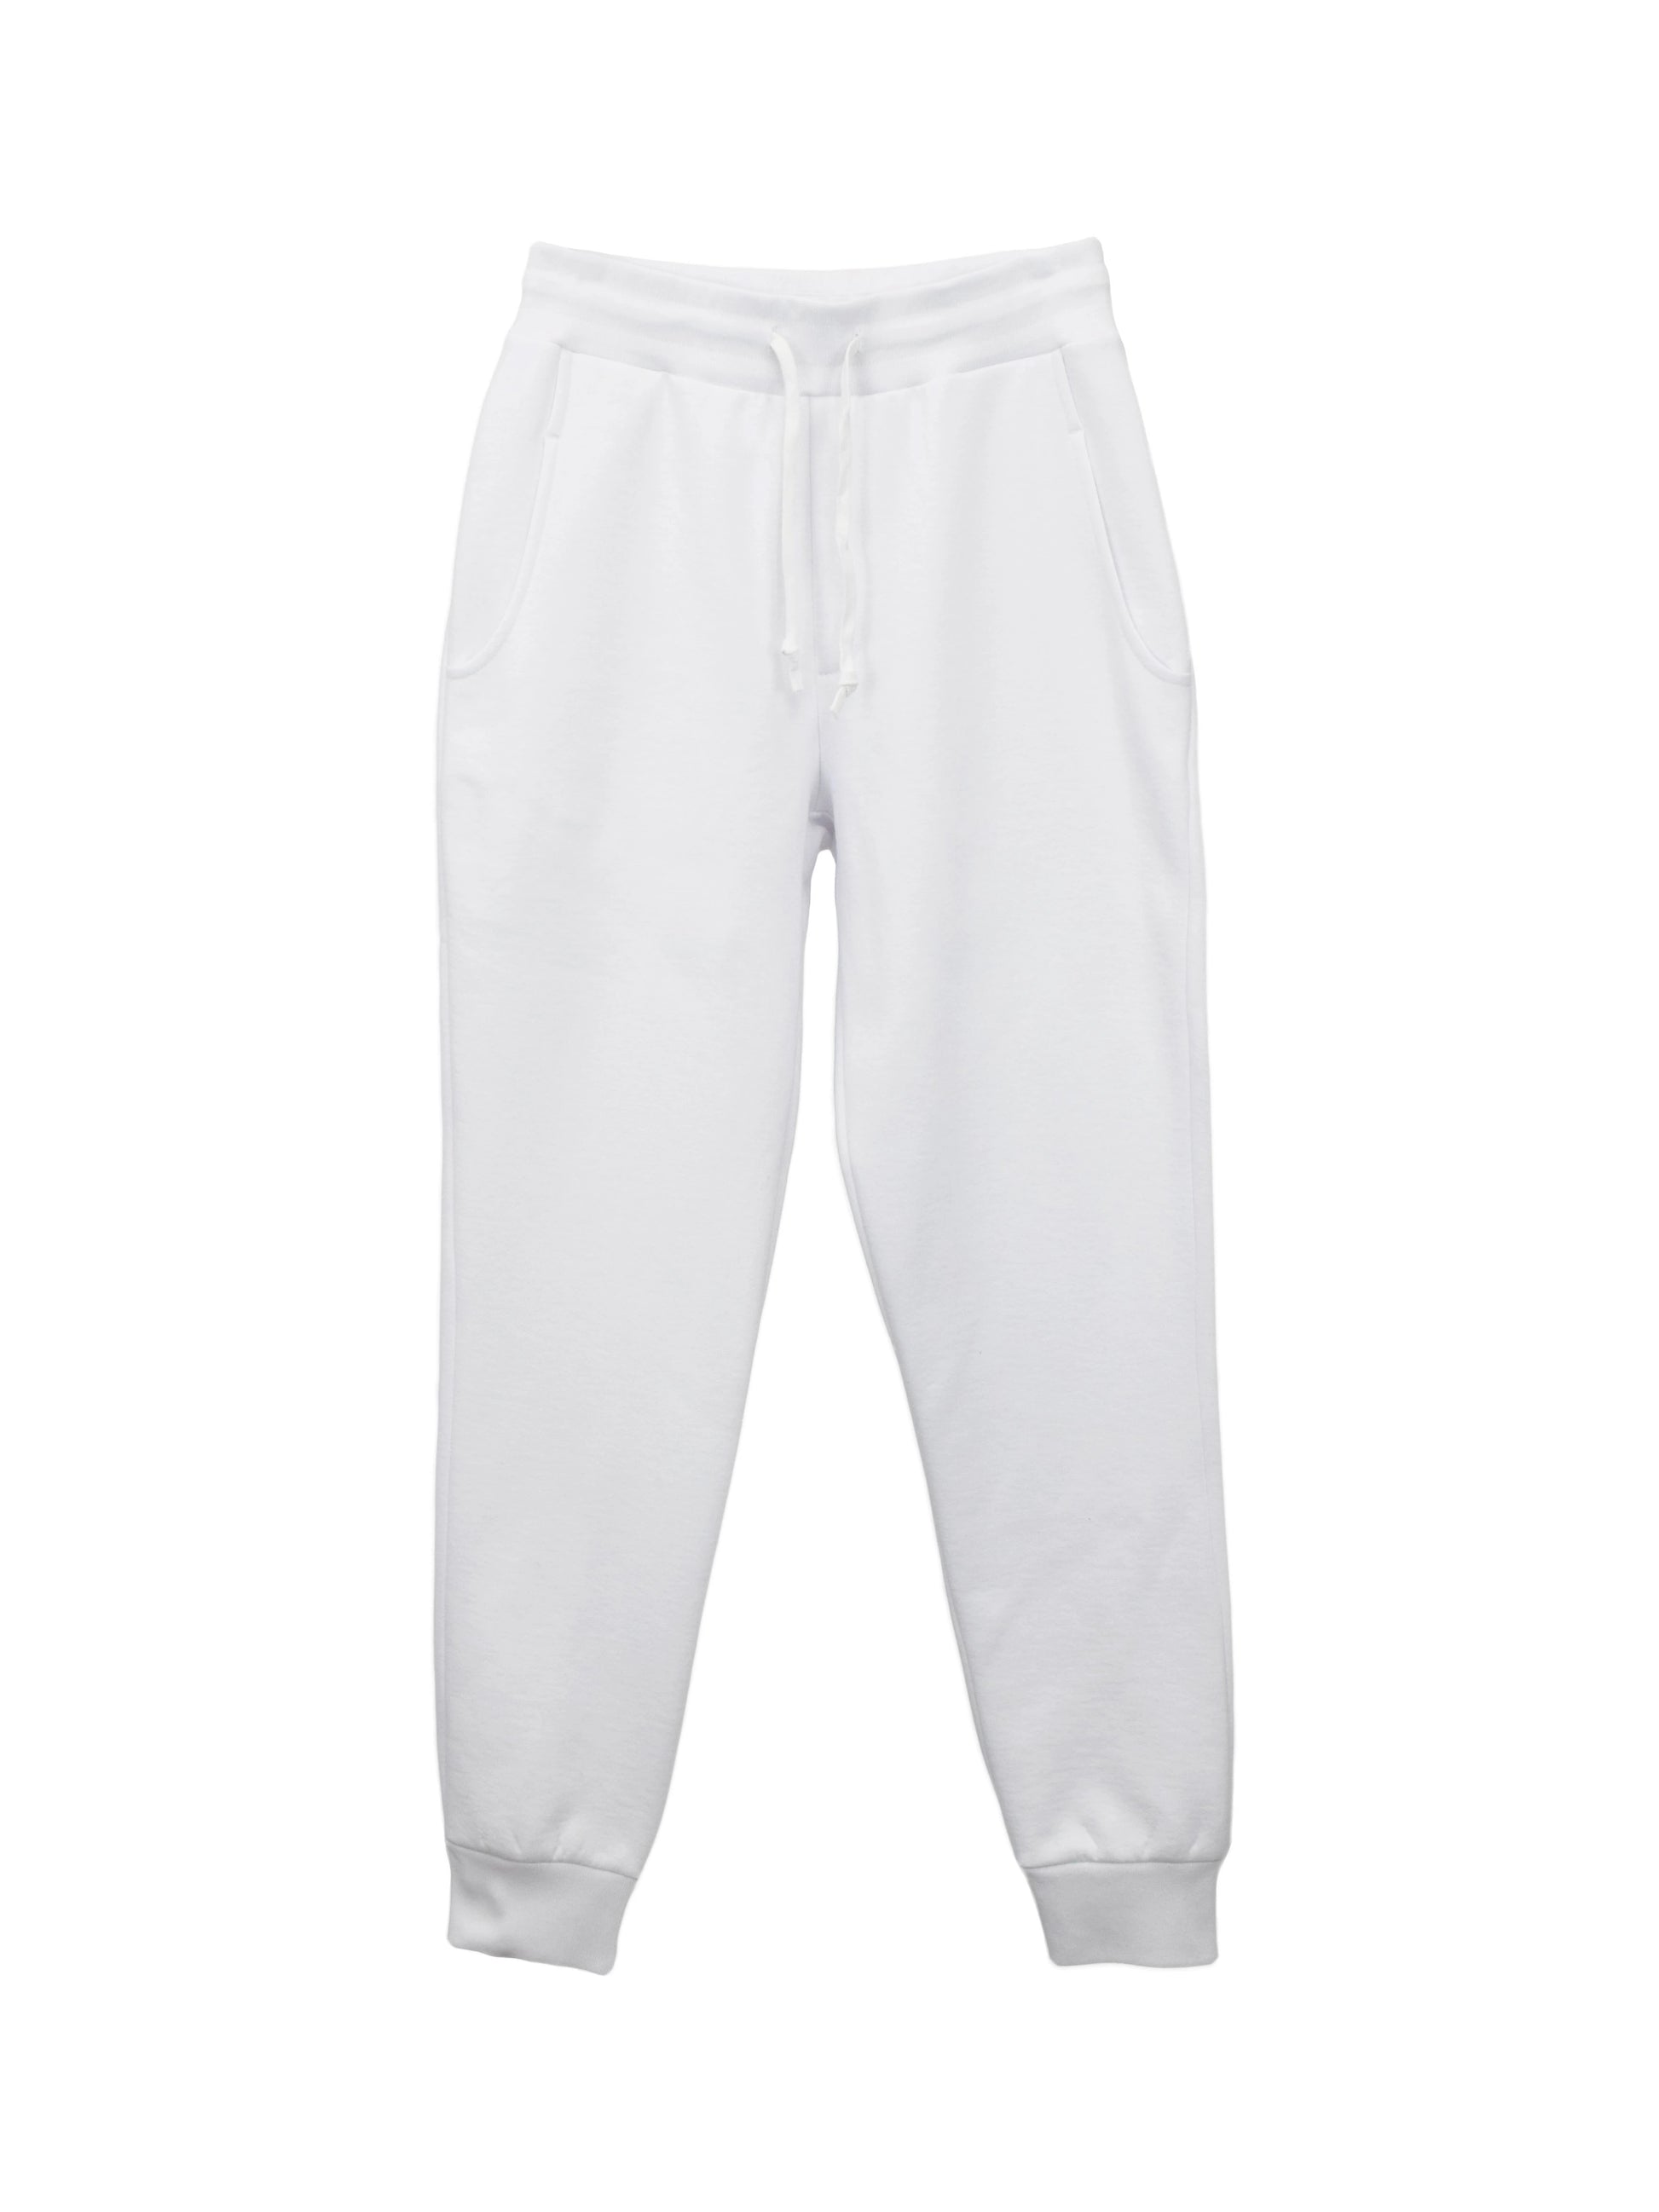 Front of White Joggers